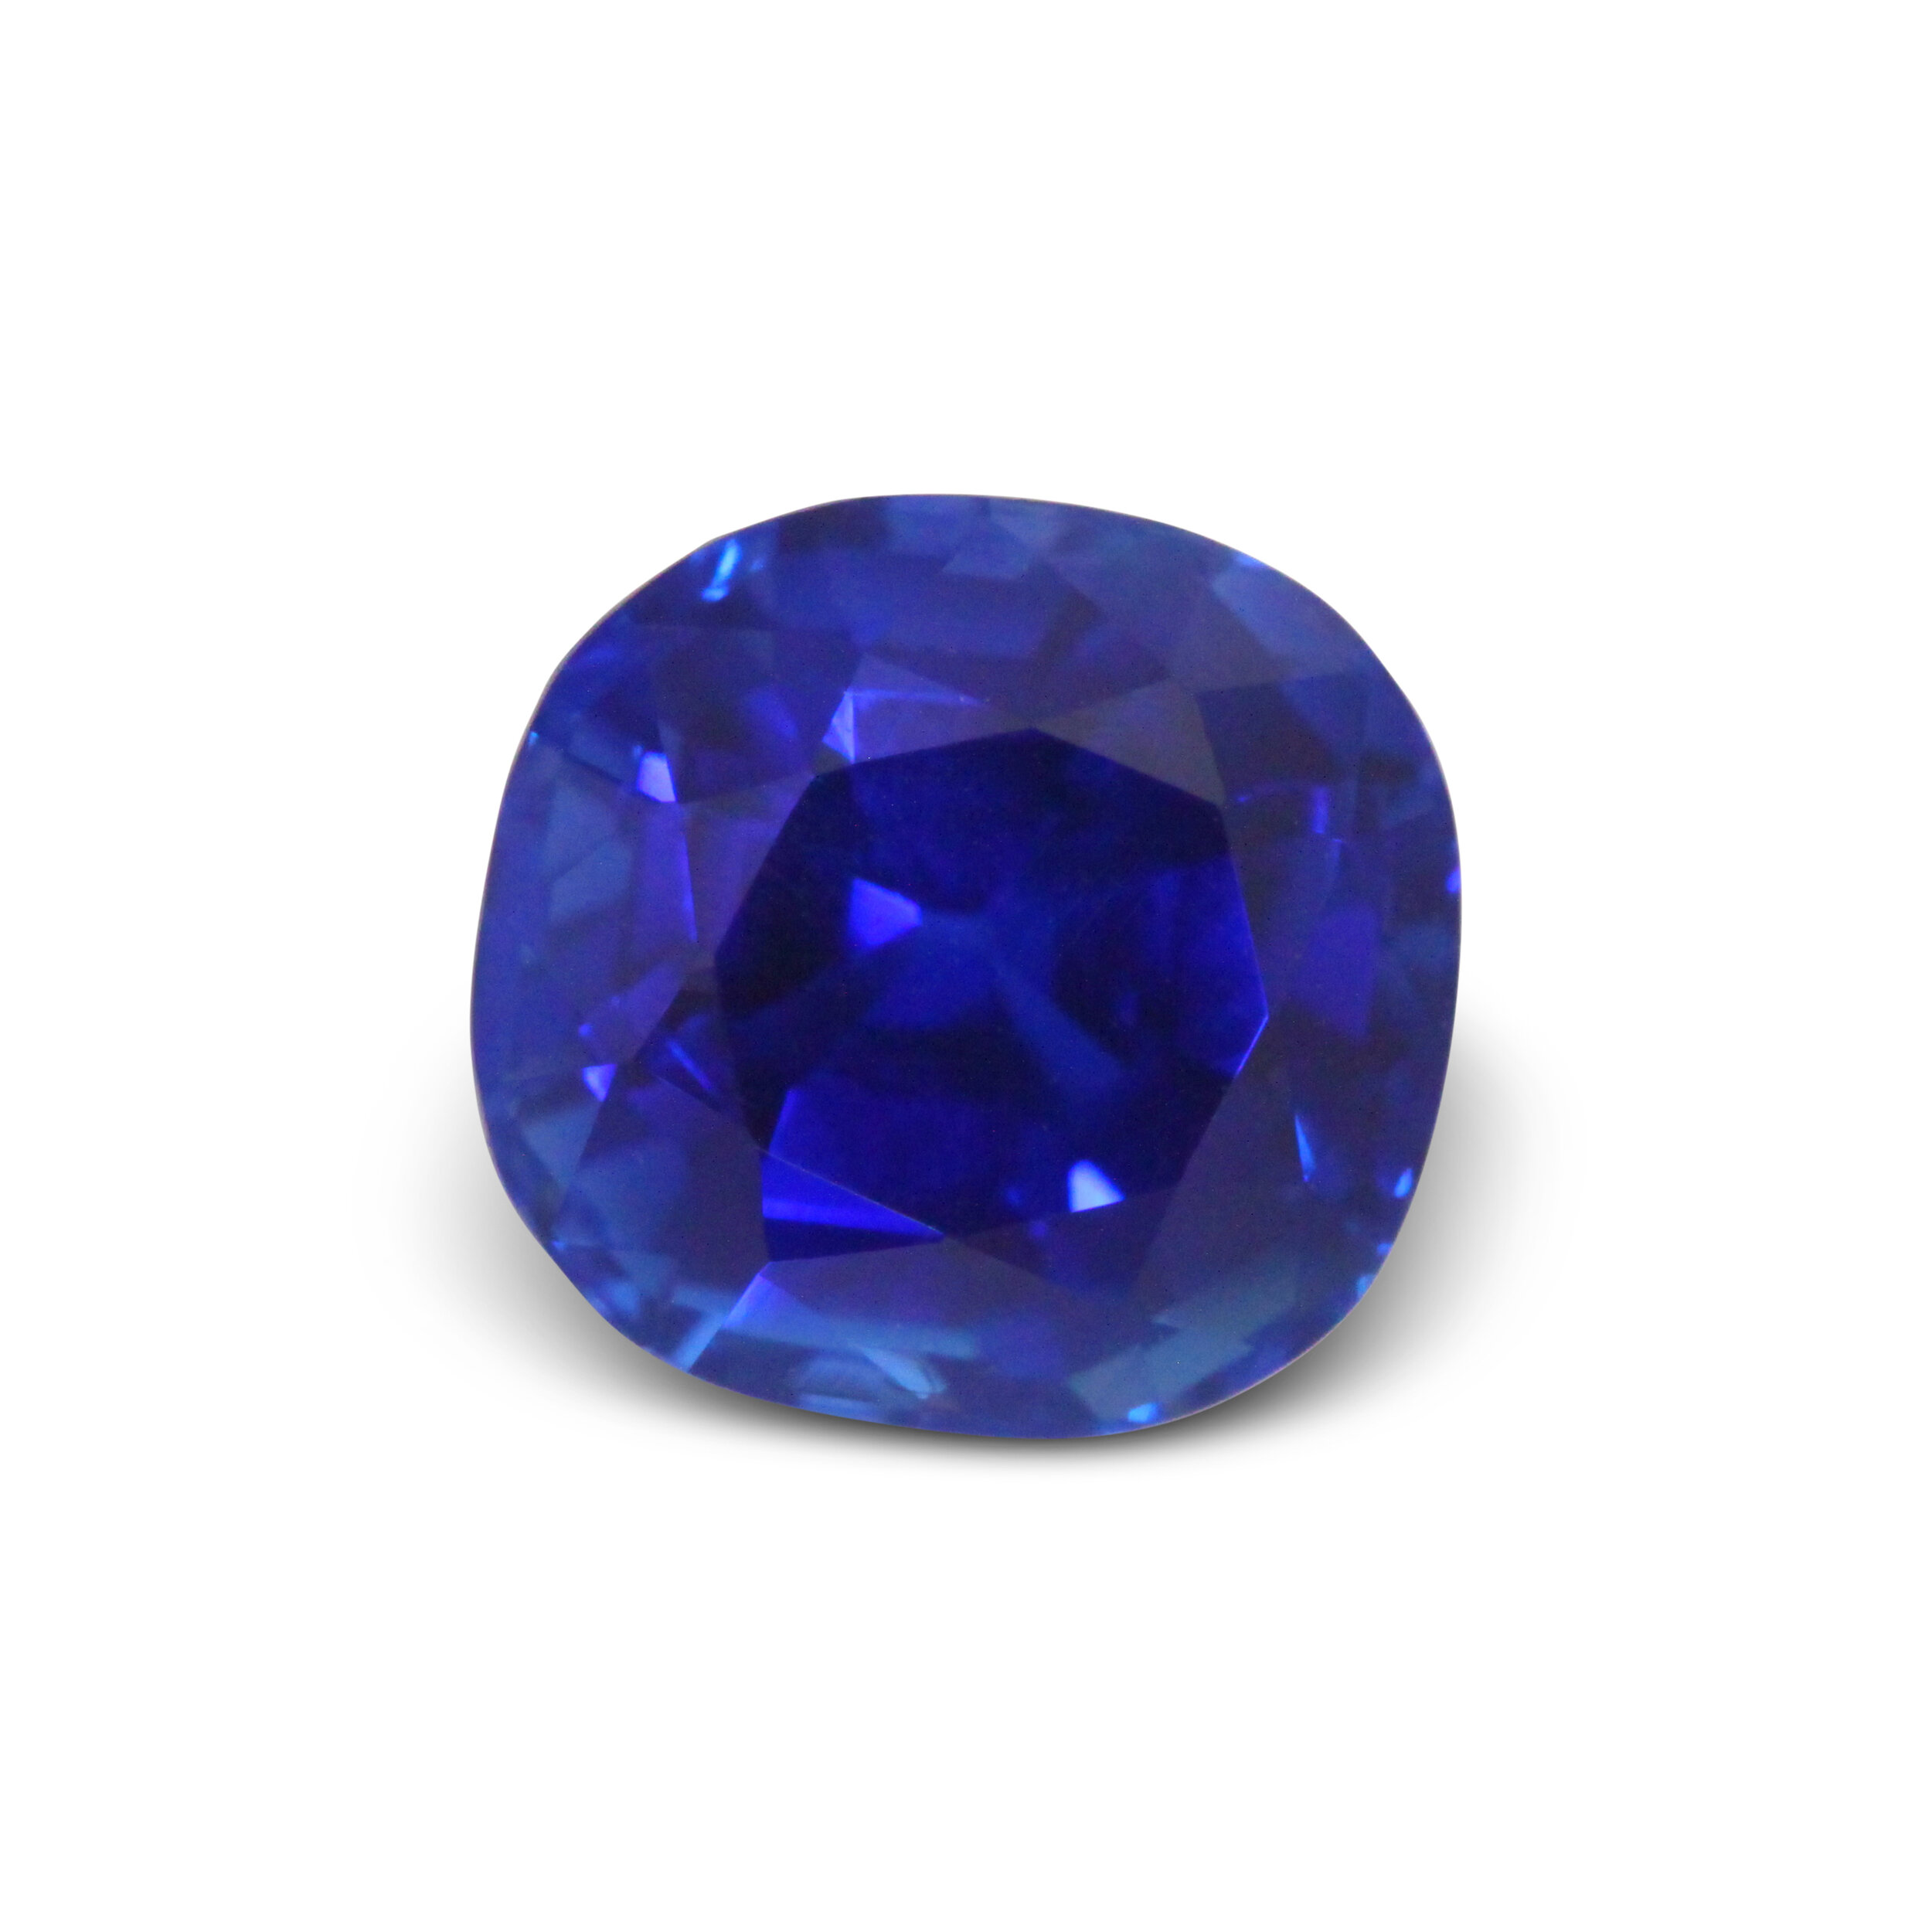 Kashmir sapphire ring sets auction house record - Antique Collecting